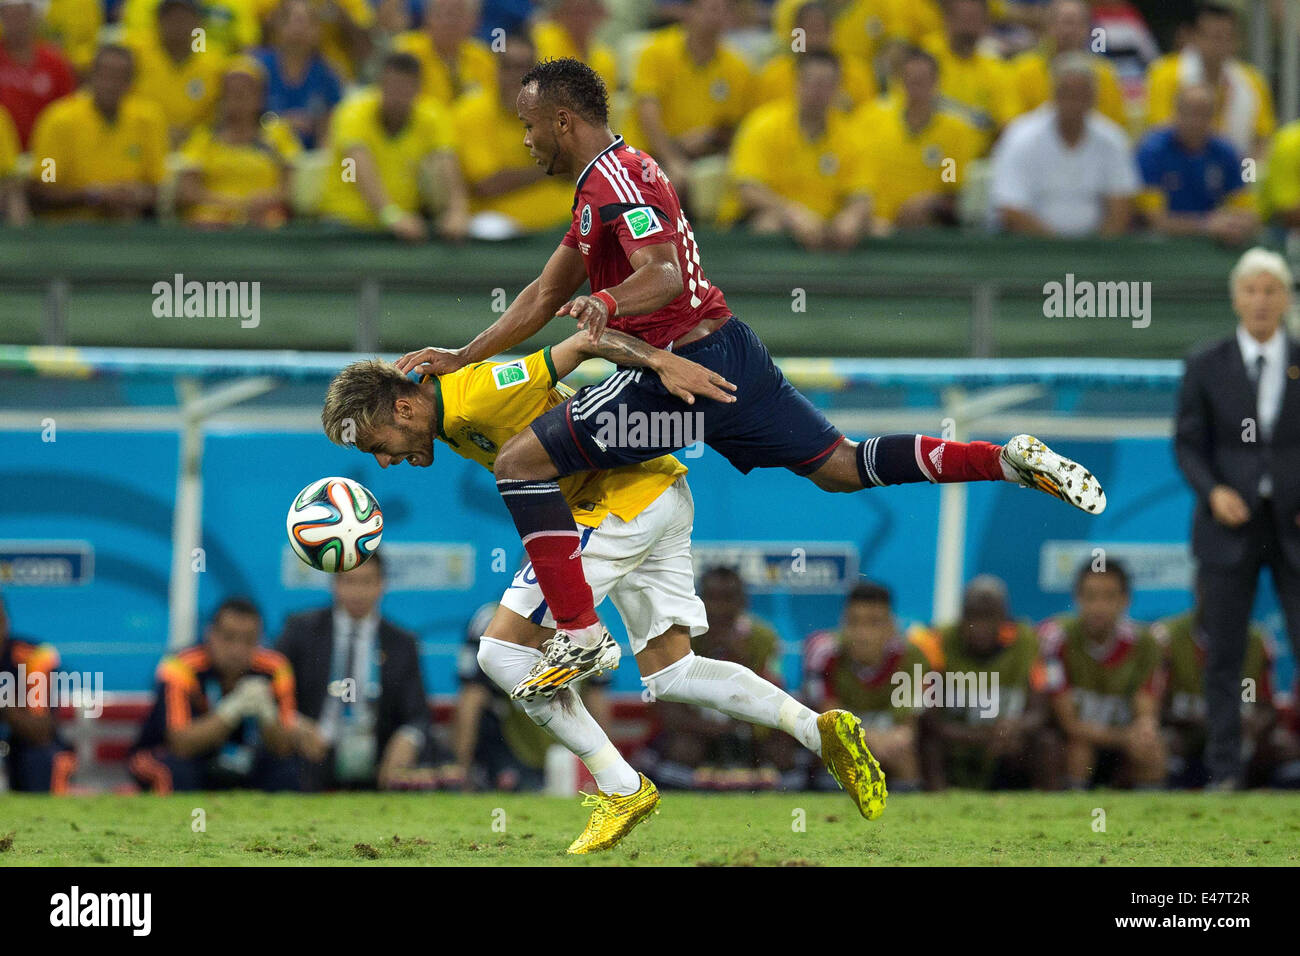 Fortaleza, Brazil. 4th July, 2014. Brazil's Neymar (L) is fouled by Juan Camilo Zuniga of Colombia during the quarterfinal match between Brazil and Colombia of 2014 Brazil FIFA World Cup at the Castelao Stadium, in Fortaleza, Brazil, on July 4, 2014. Credit:  AGENCIA ESTADO/Xinhua/Alamy Live News Stock Photo